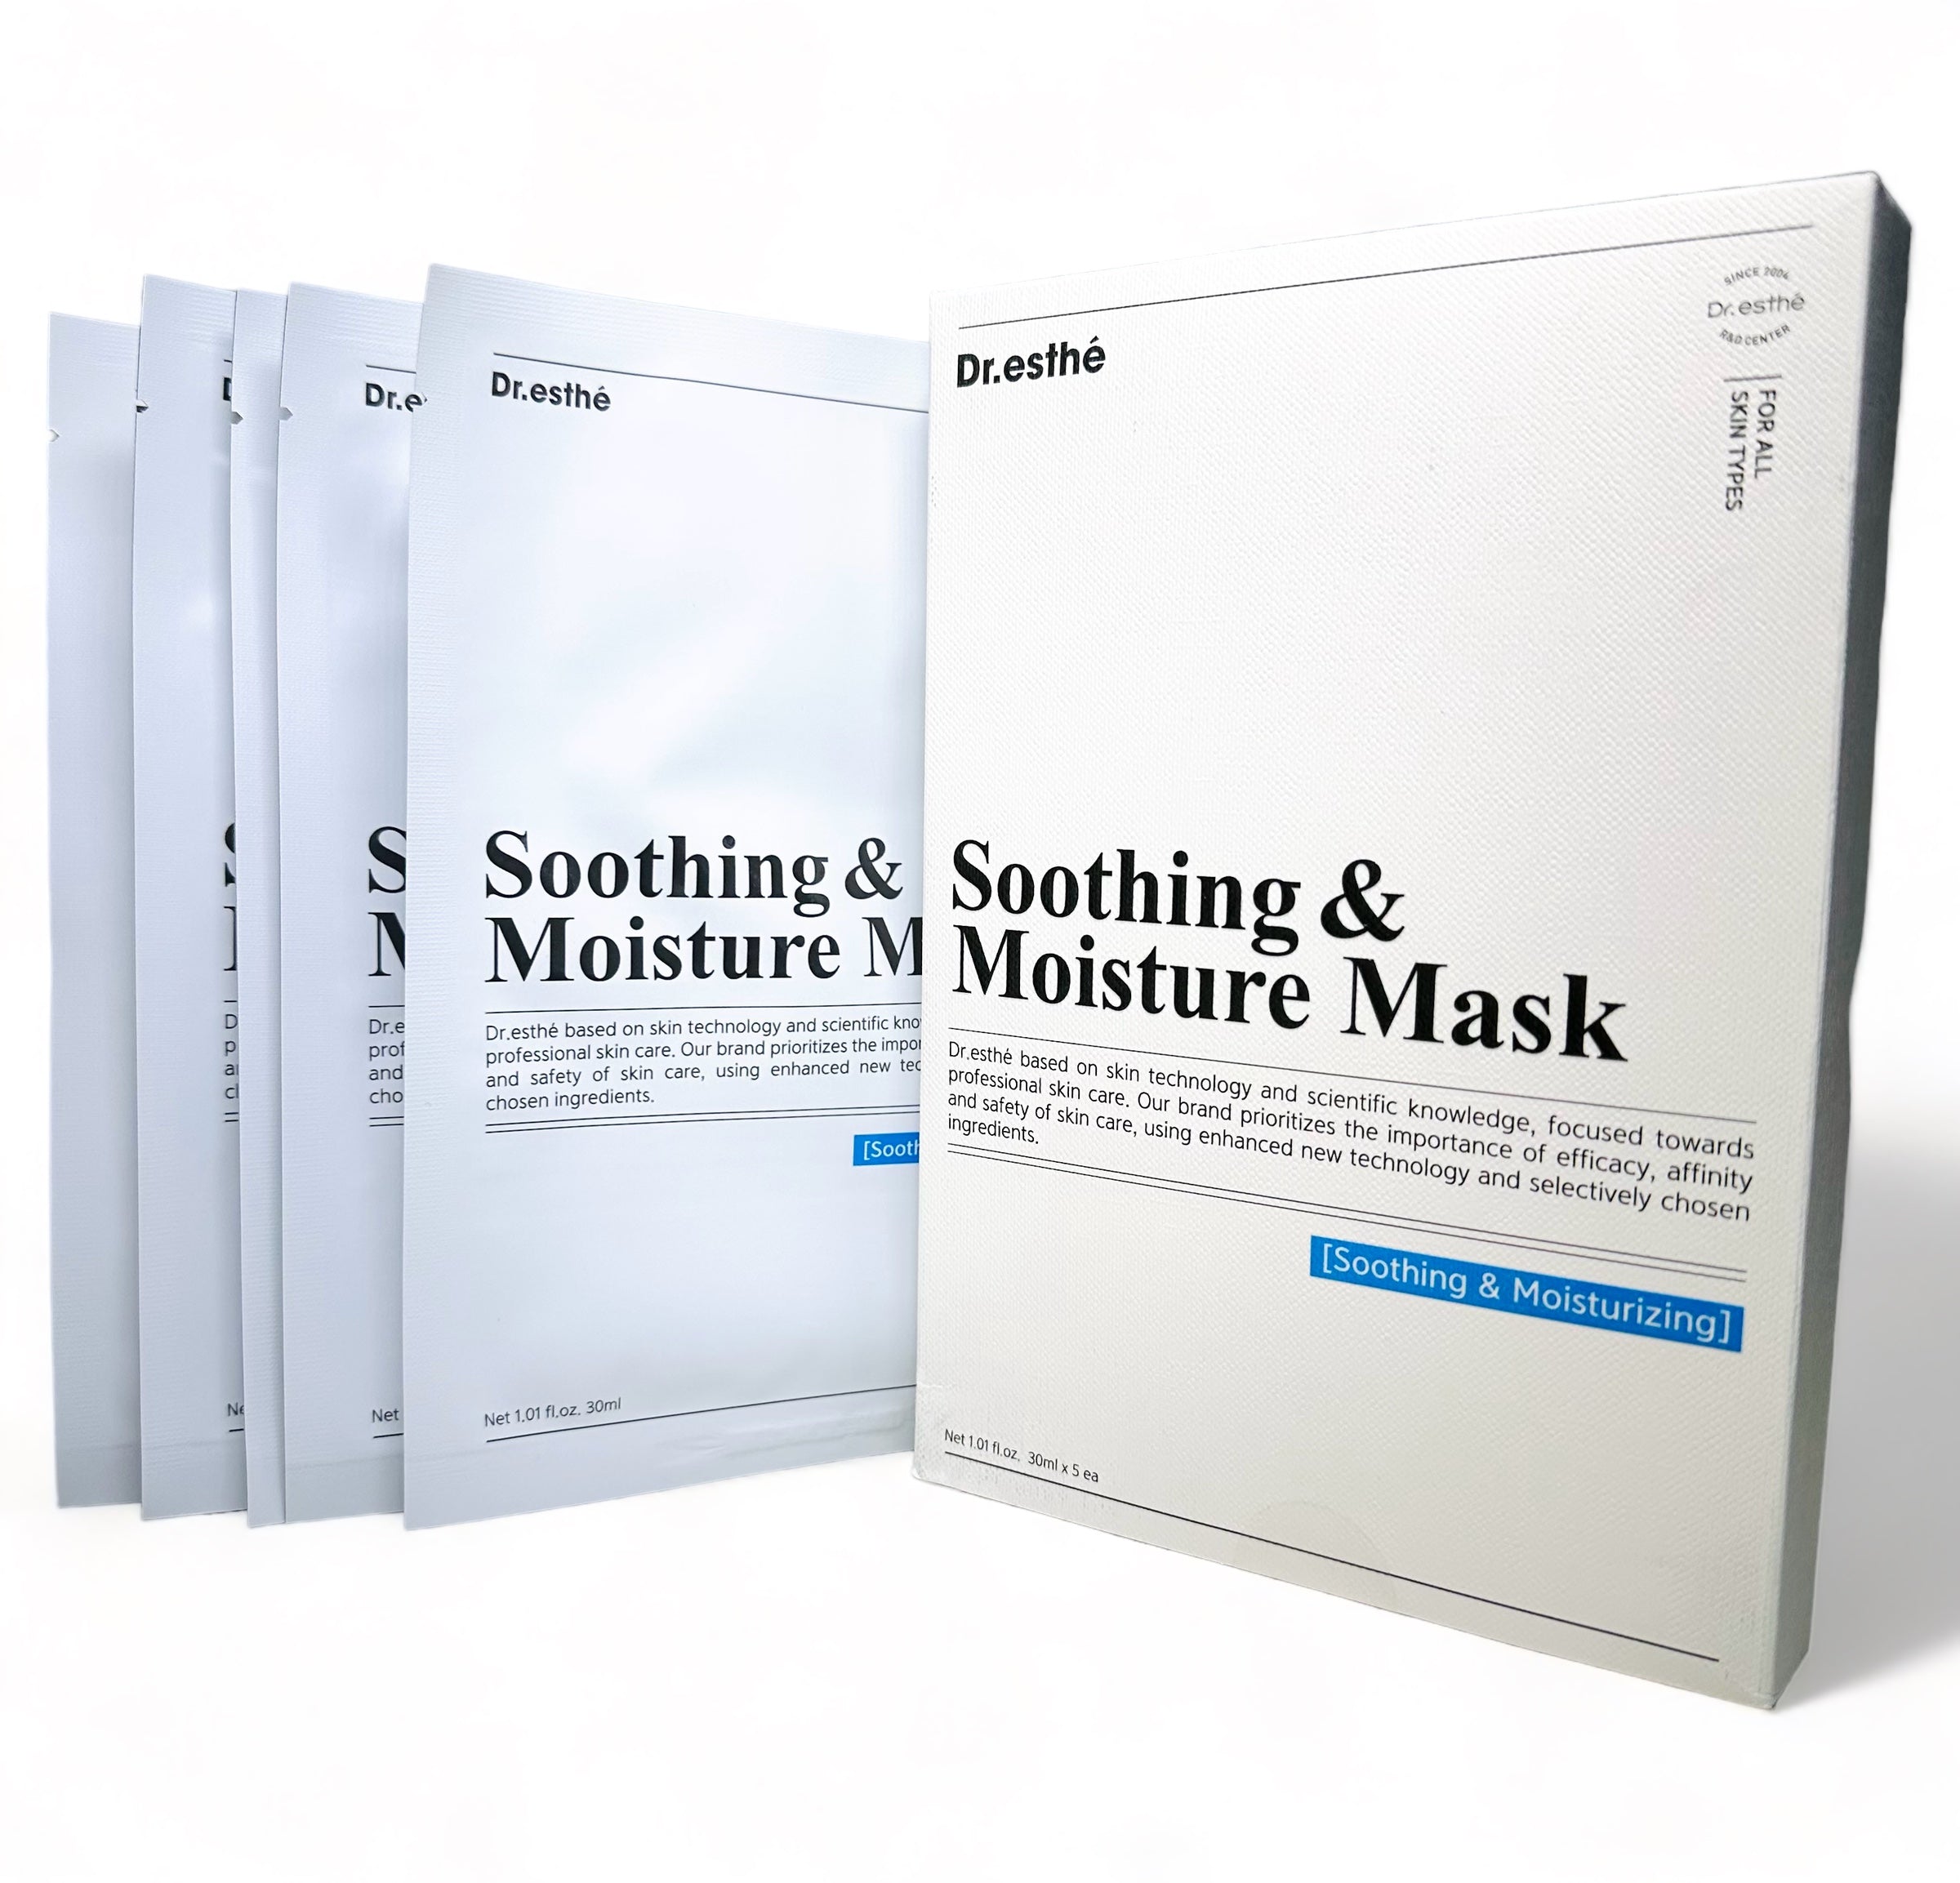 Dr.esthe Soothing & Moisture mask 5 pc